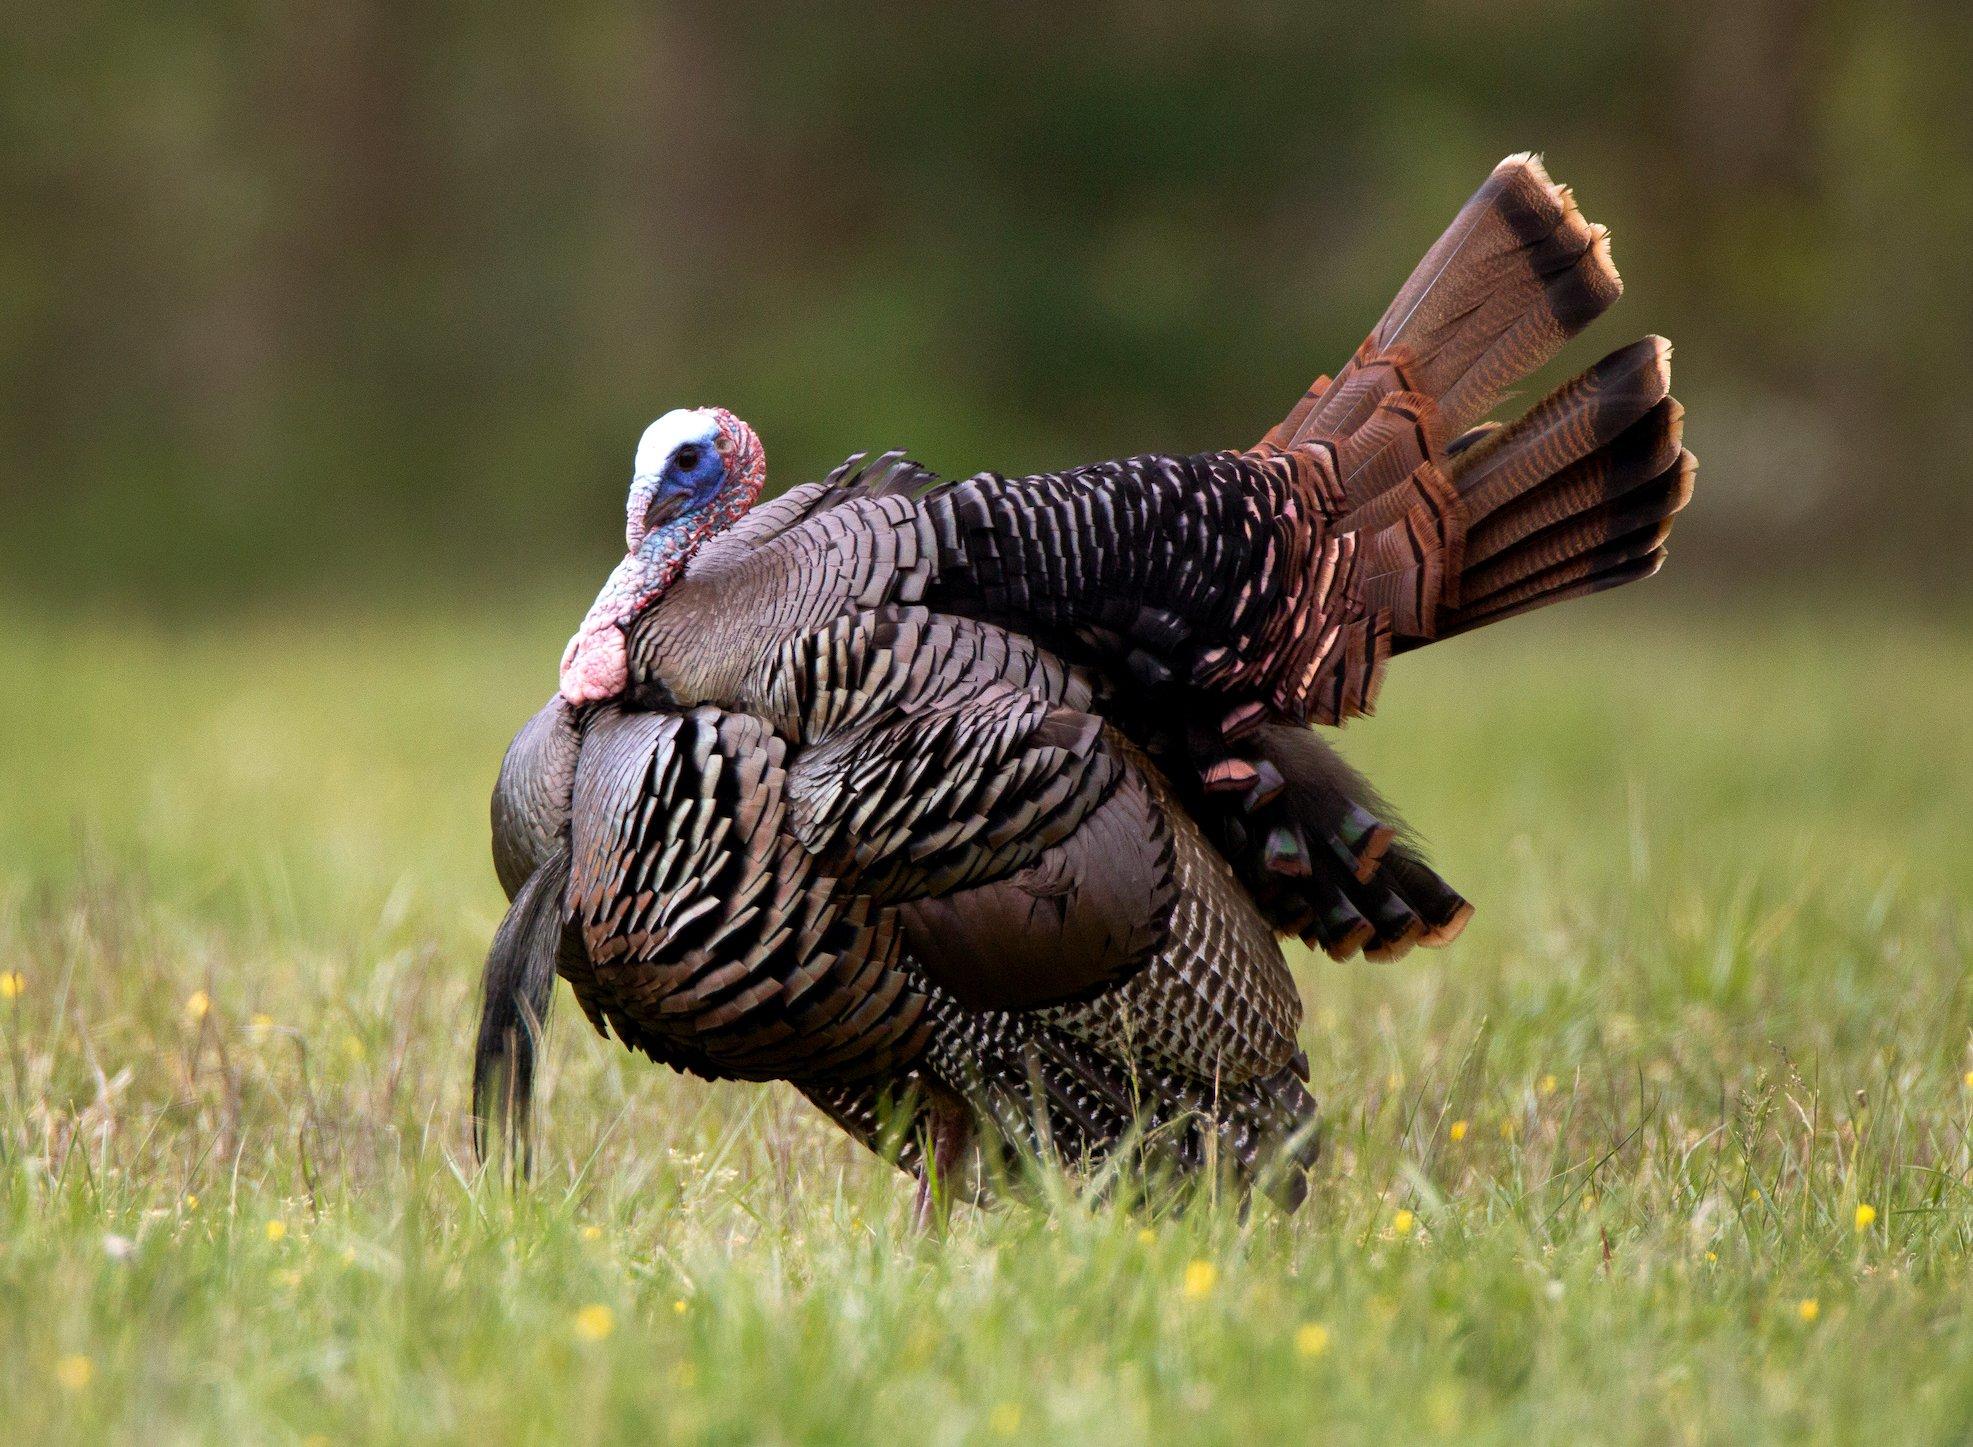 You usually can't call a gobbler to a location he's not comfortable approaching. For example, if you're on one side of a river and he's on the other, he likely won't fly across to your calling. Plan carefully and pick a setup where you think the gobbler wants to go. Image by Russell Graves